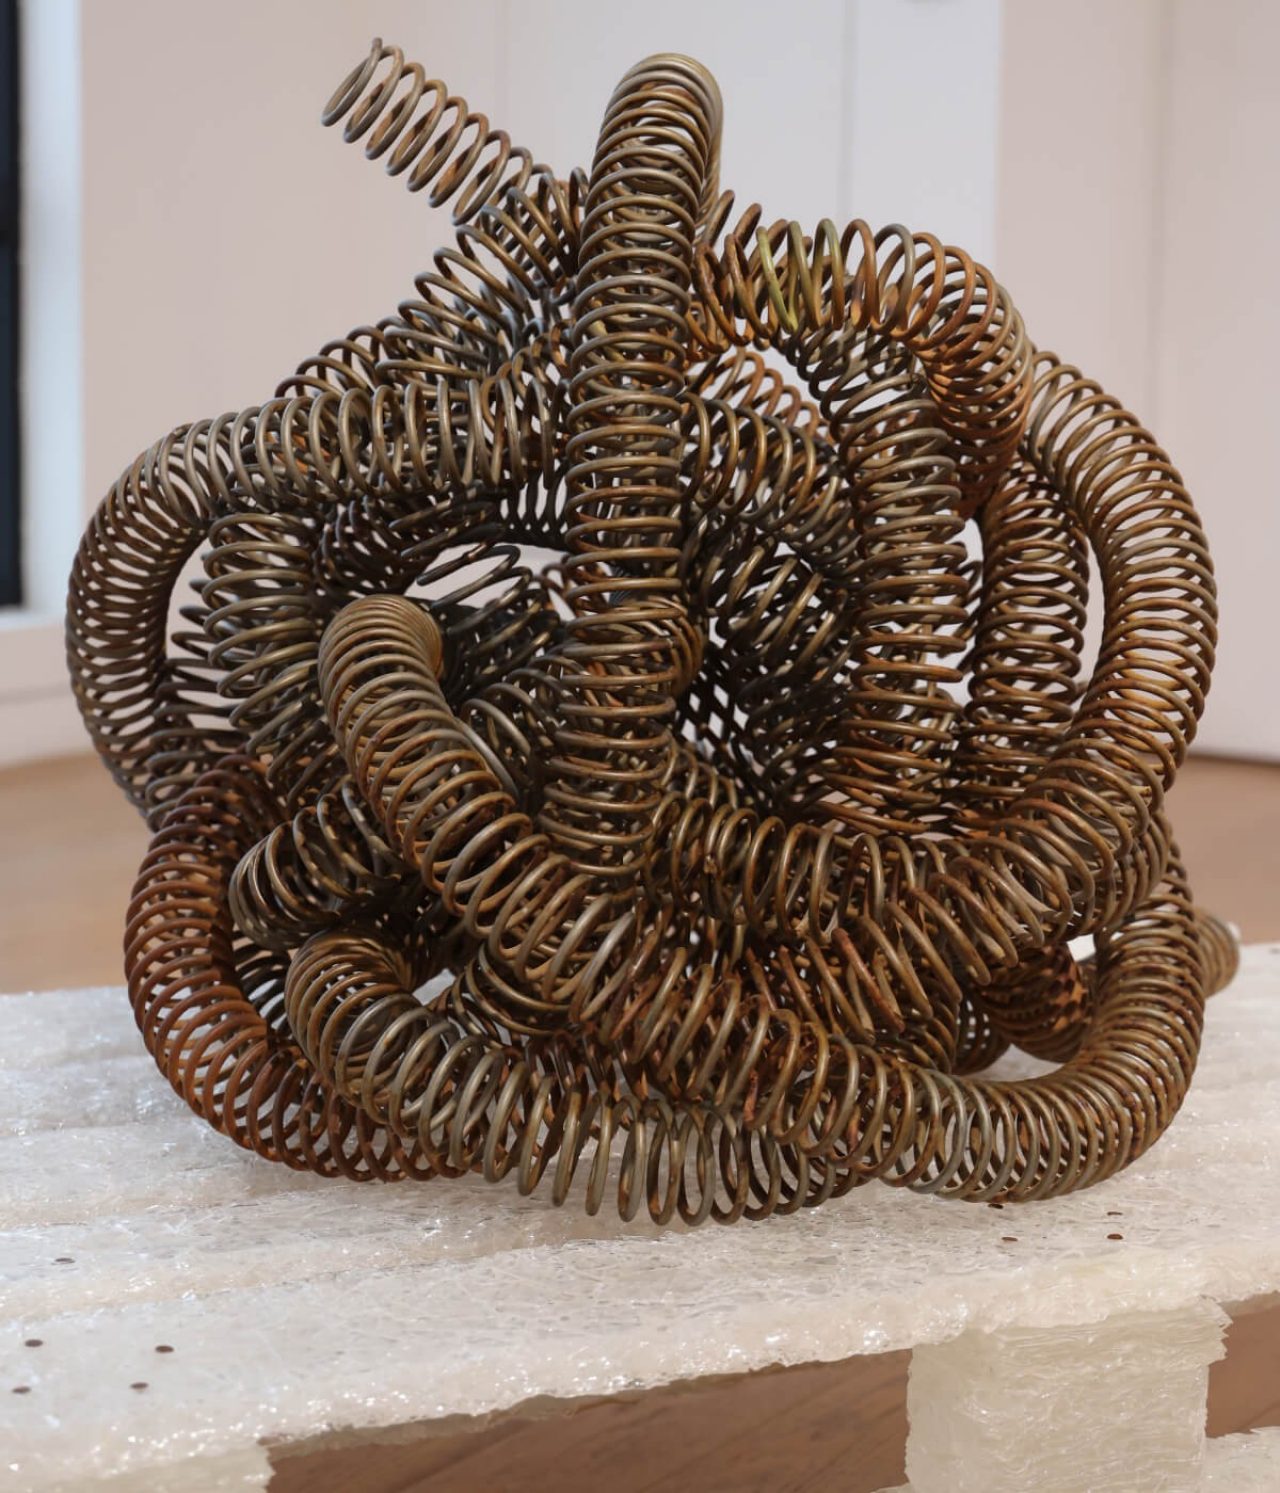 The piece is a metallic coiled mass of furnace wire that sits atop a plinth that looks like a pallet, but made with compressed glass.